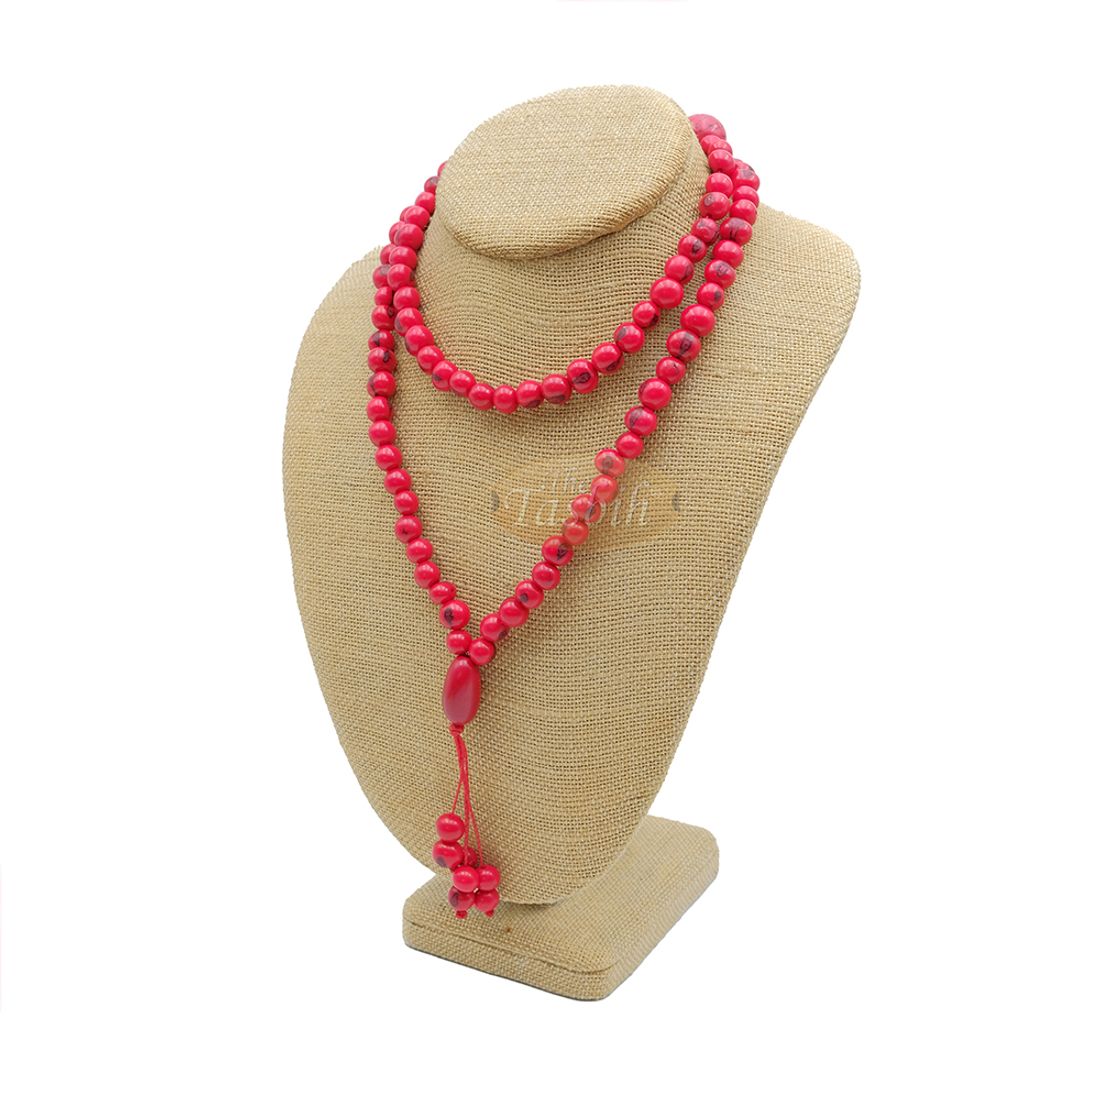 Red Colored Natural Dye Eco-friendly Sustainable Original Açai Seed 9mm Beads Traditional Tasbih